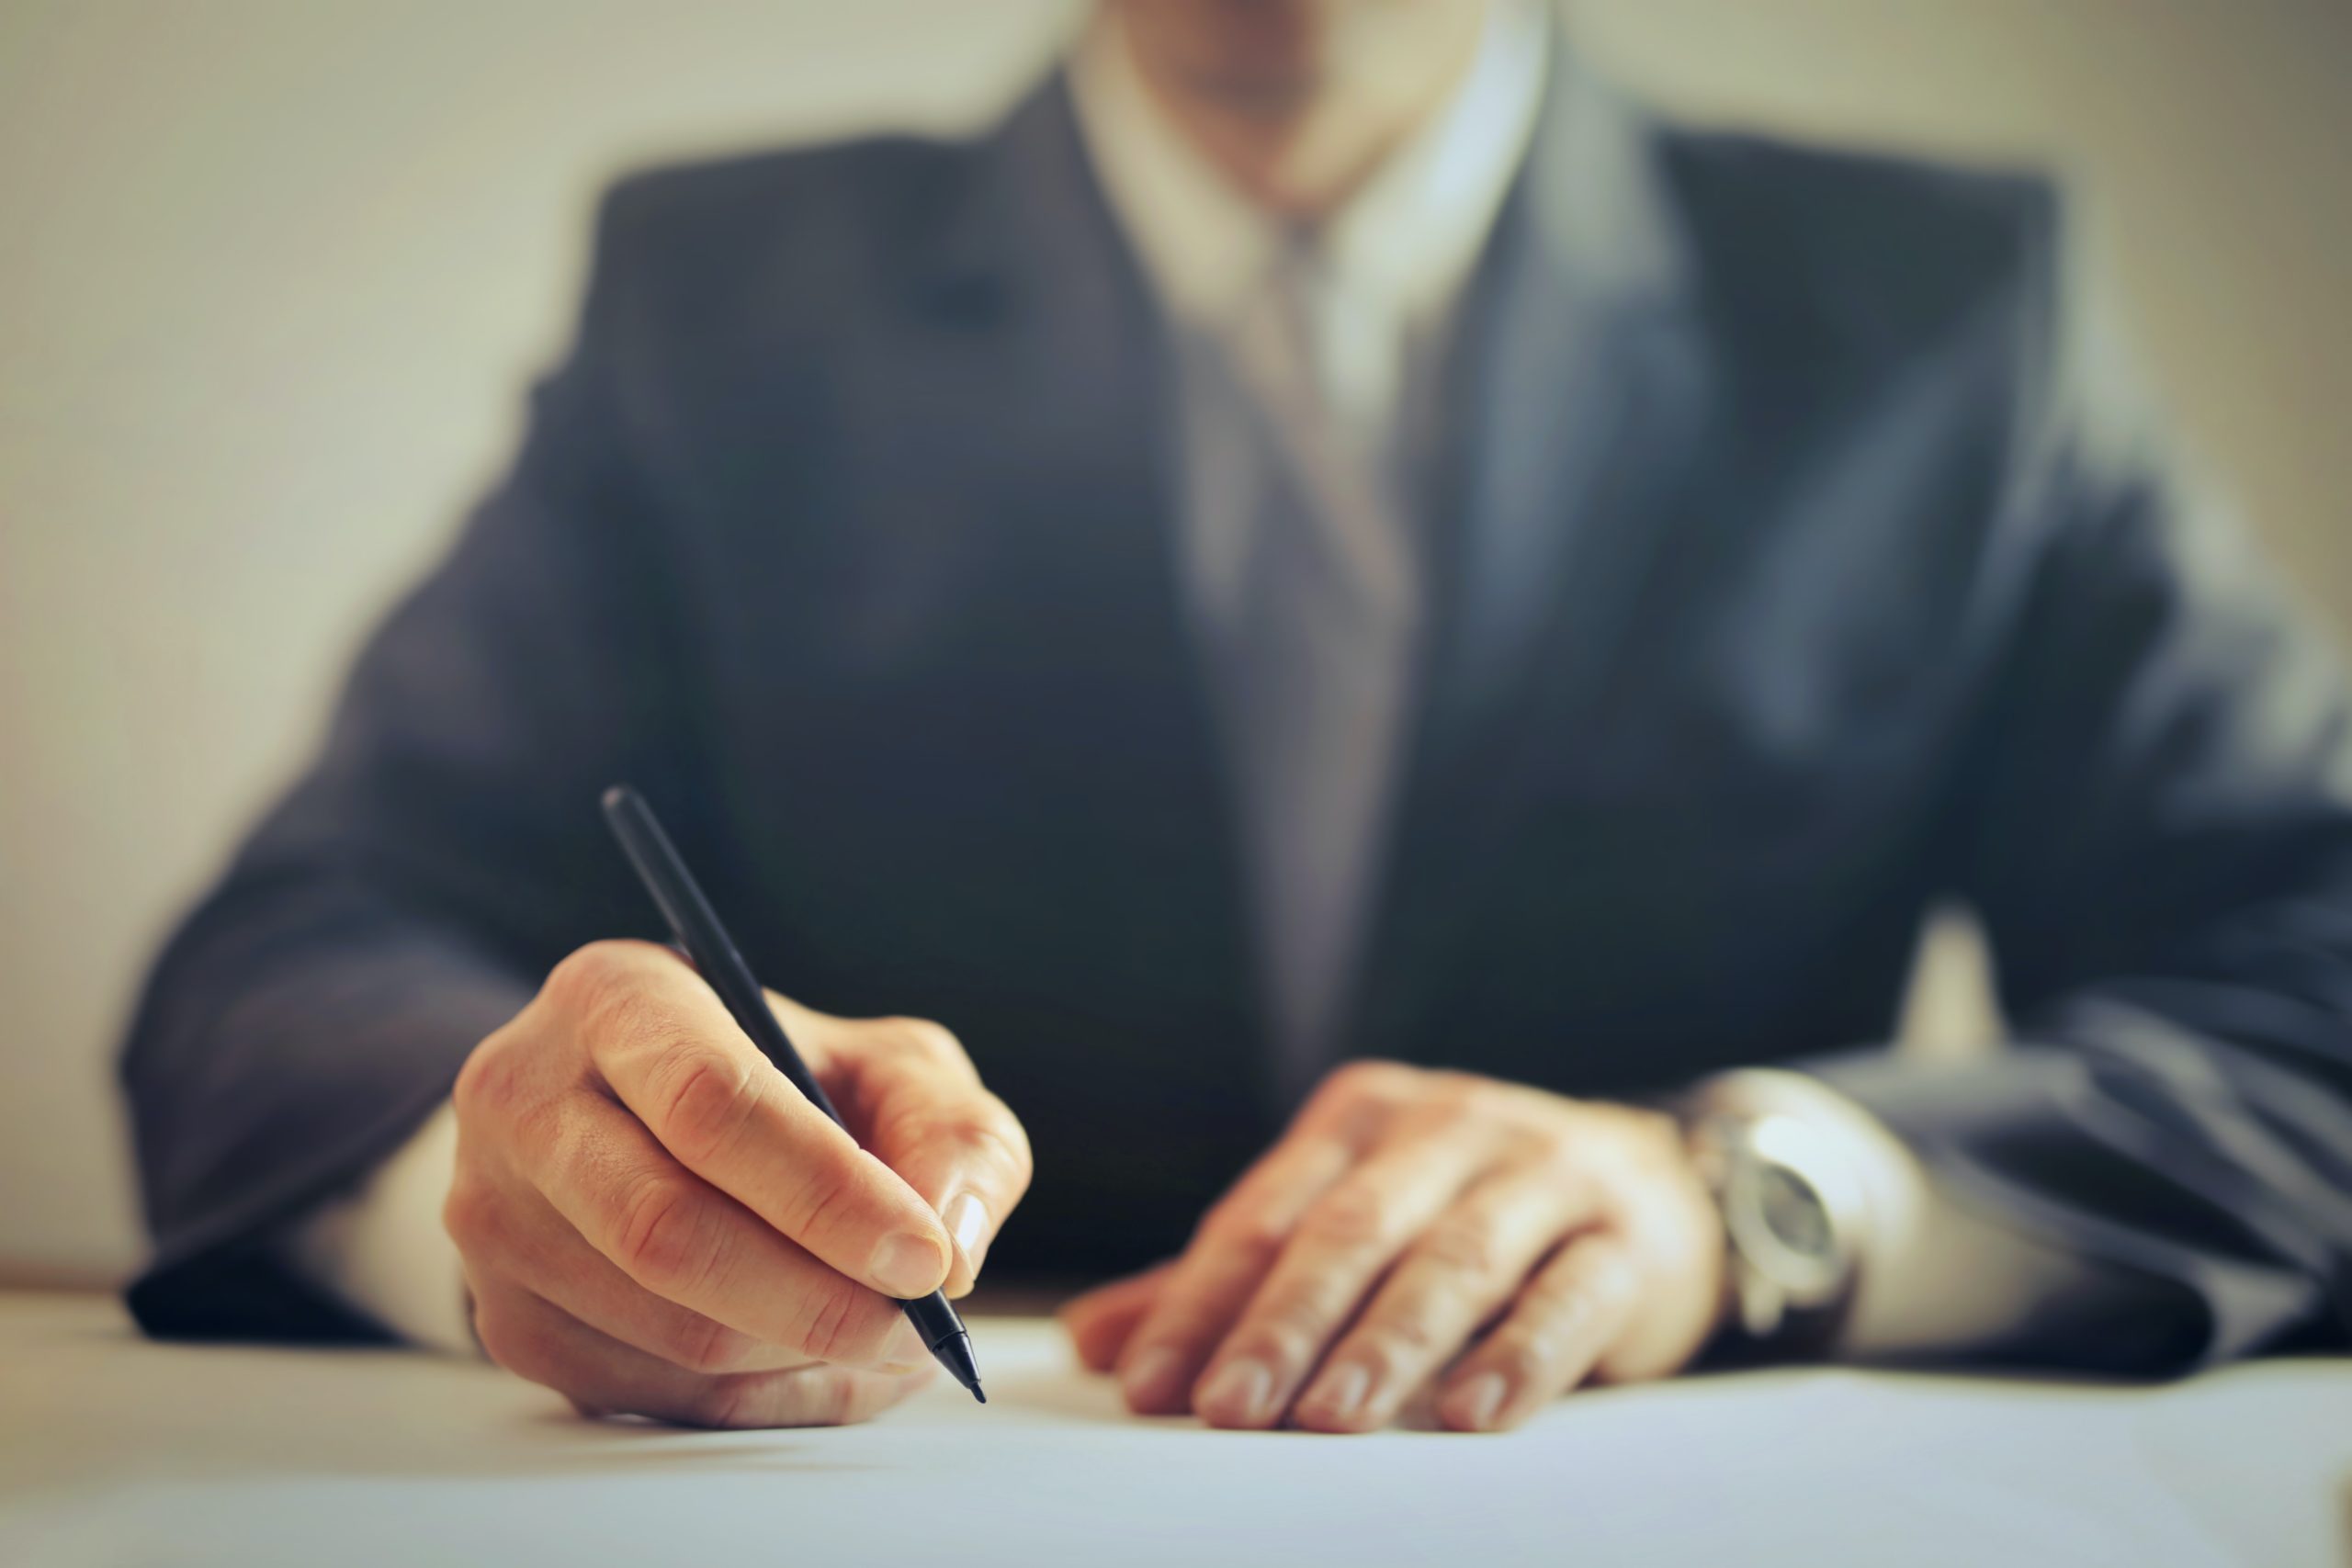 Man in suit sitting at table writing